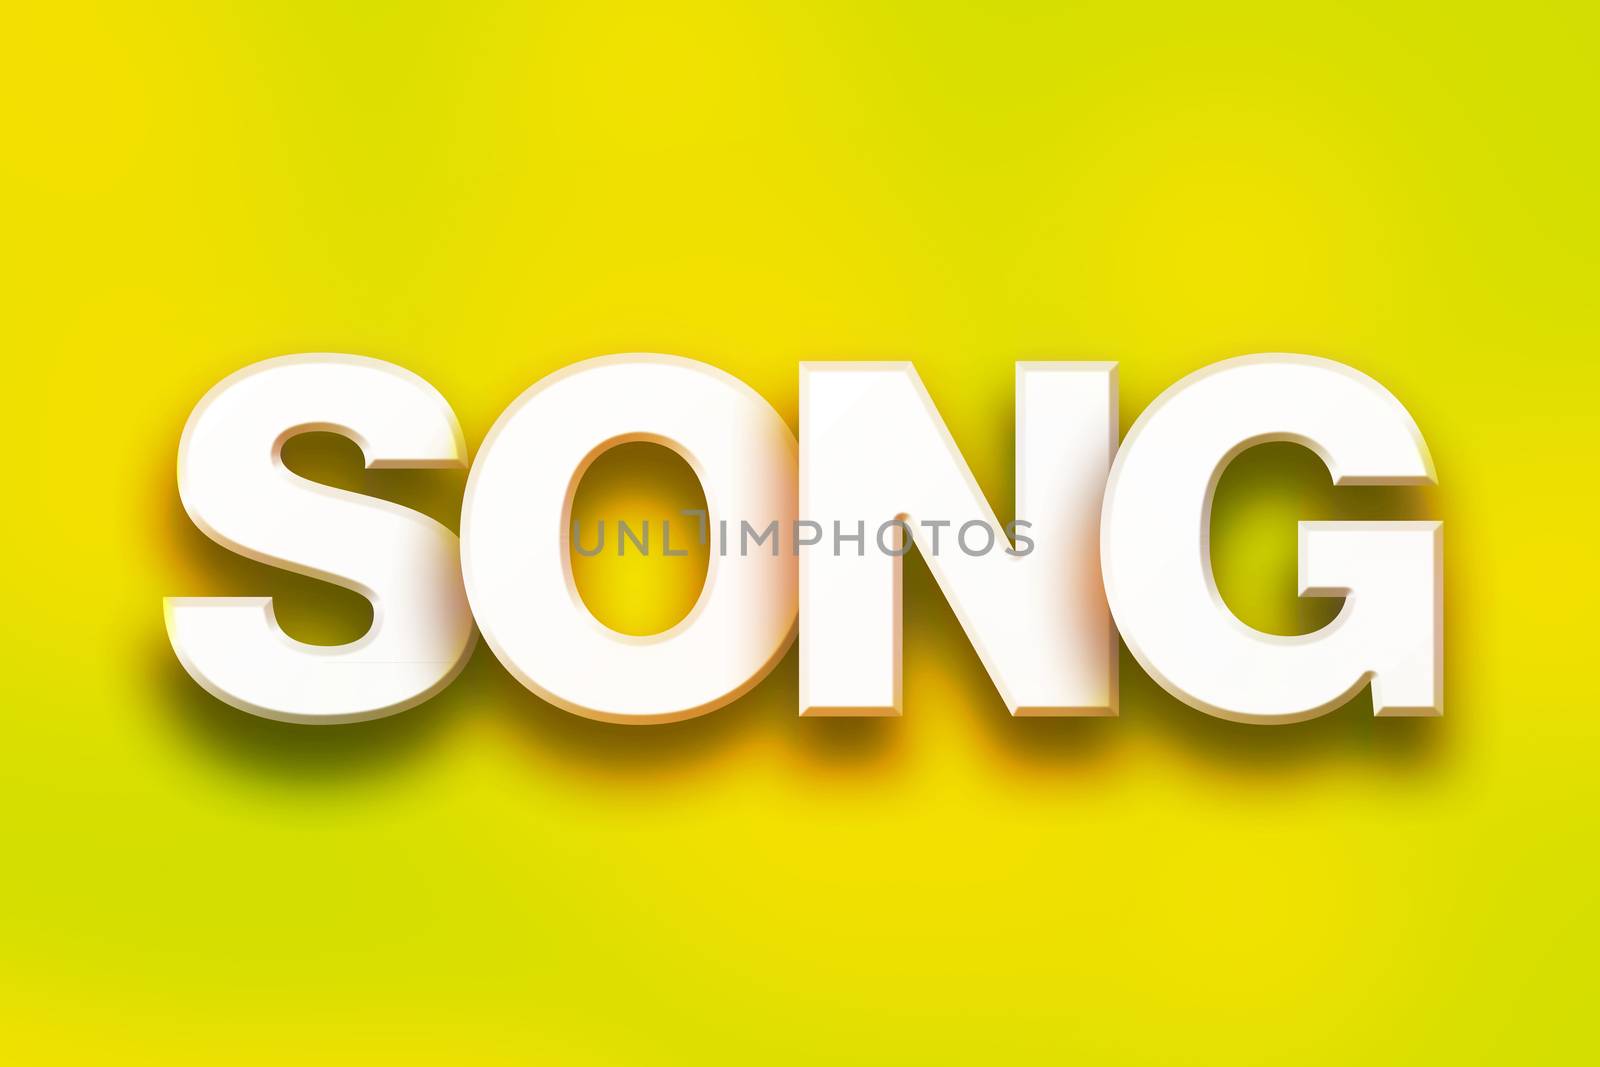 The word "Song" written in white 3D letters on a colorful background concept and theme.